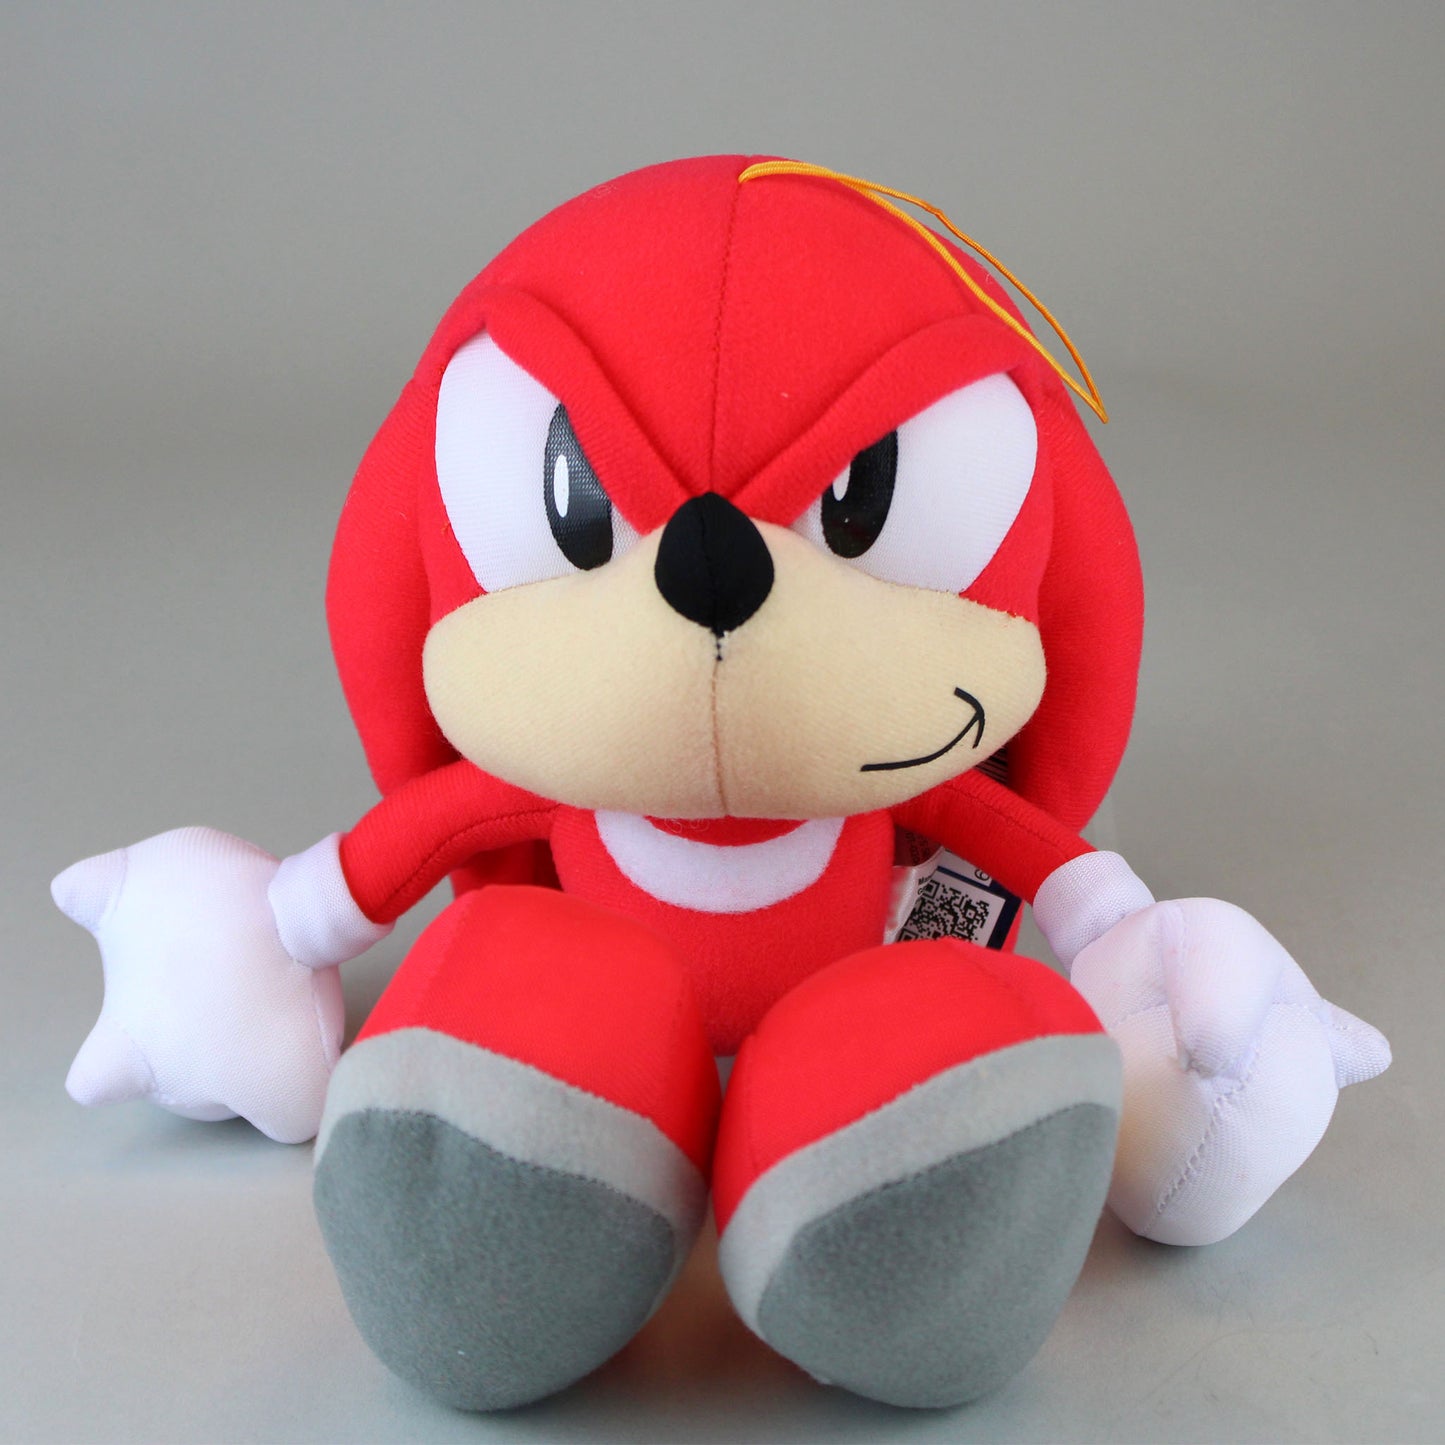 Knuckles the Echidna (Sonic the Hedgehog) 8" Plush